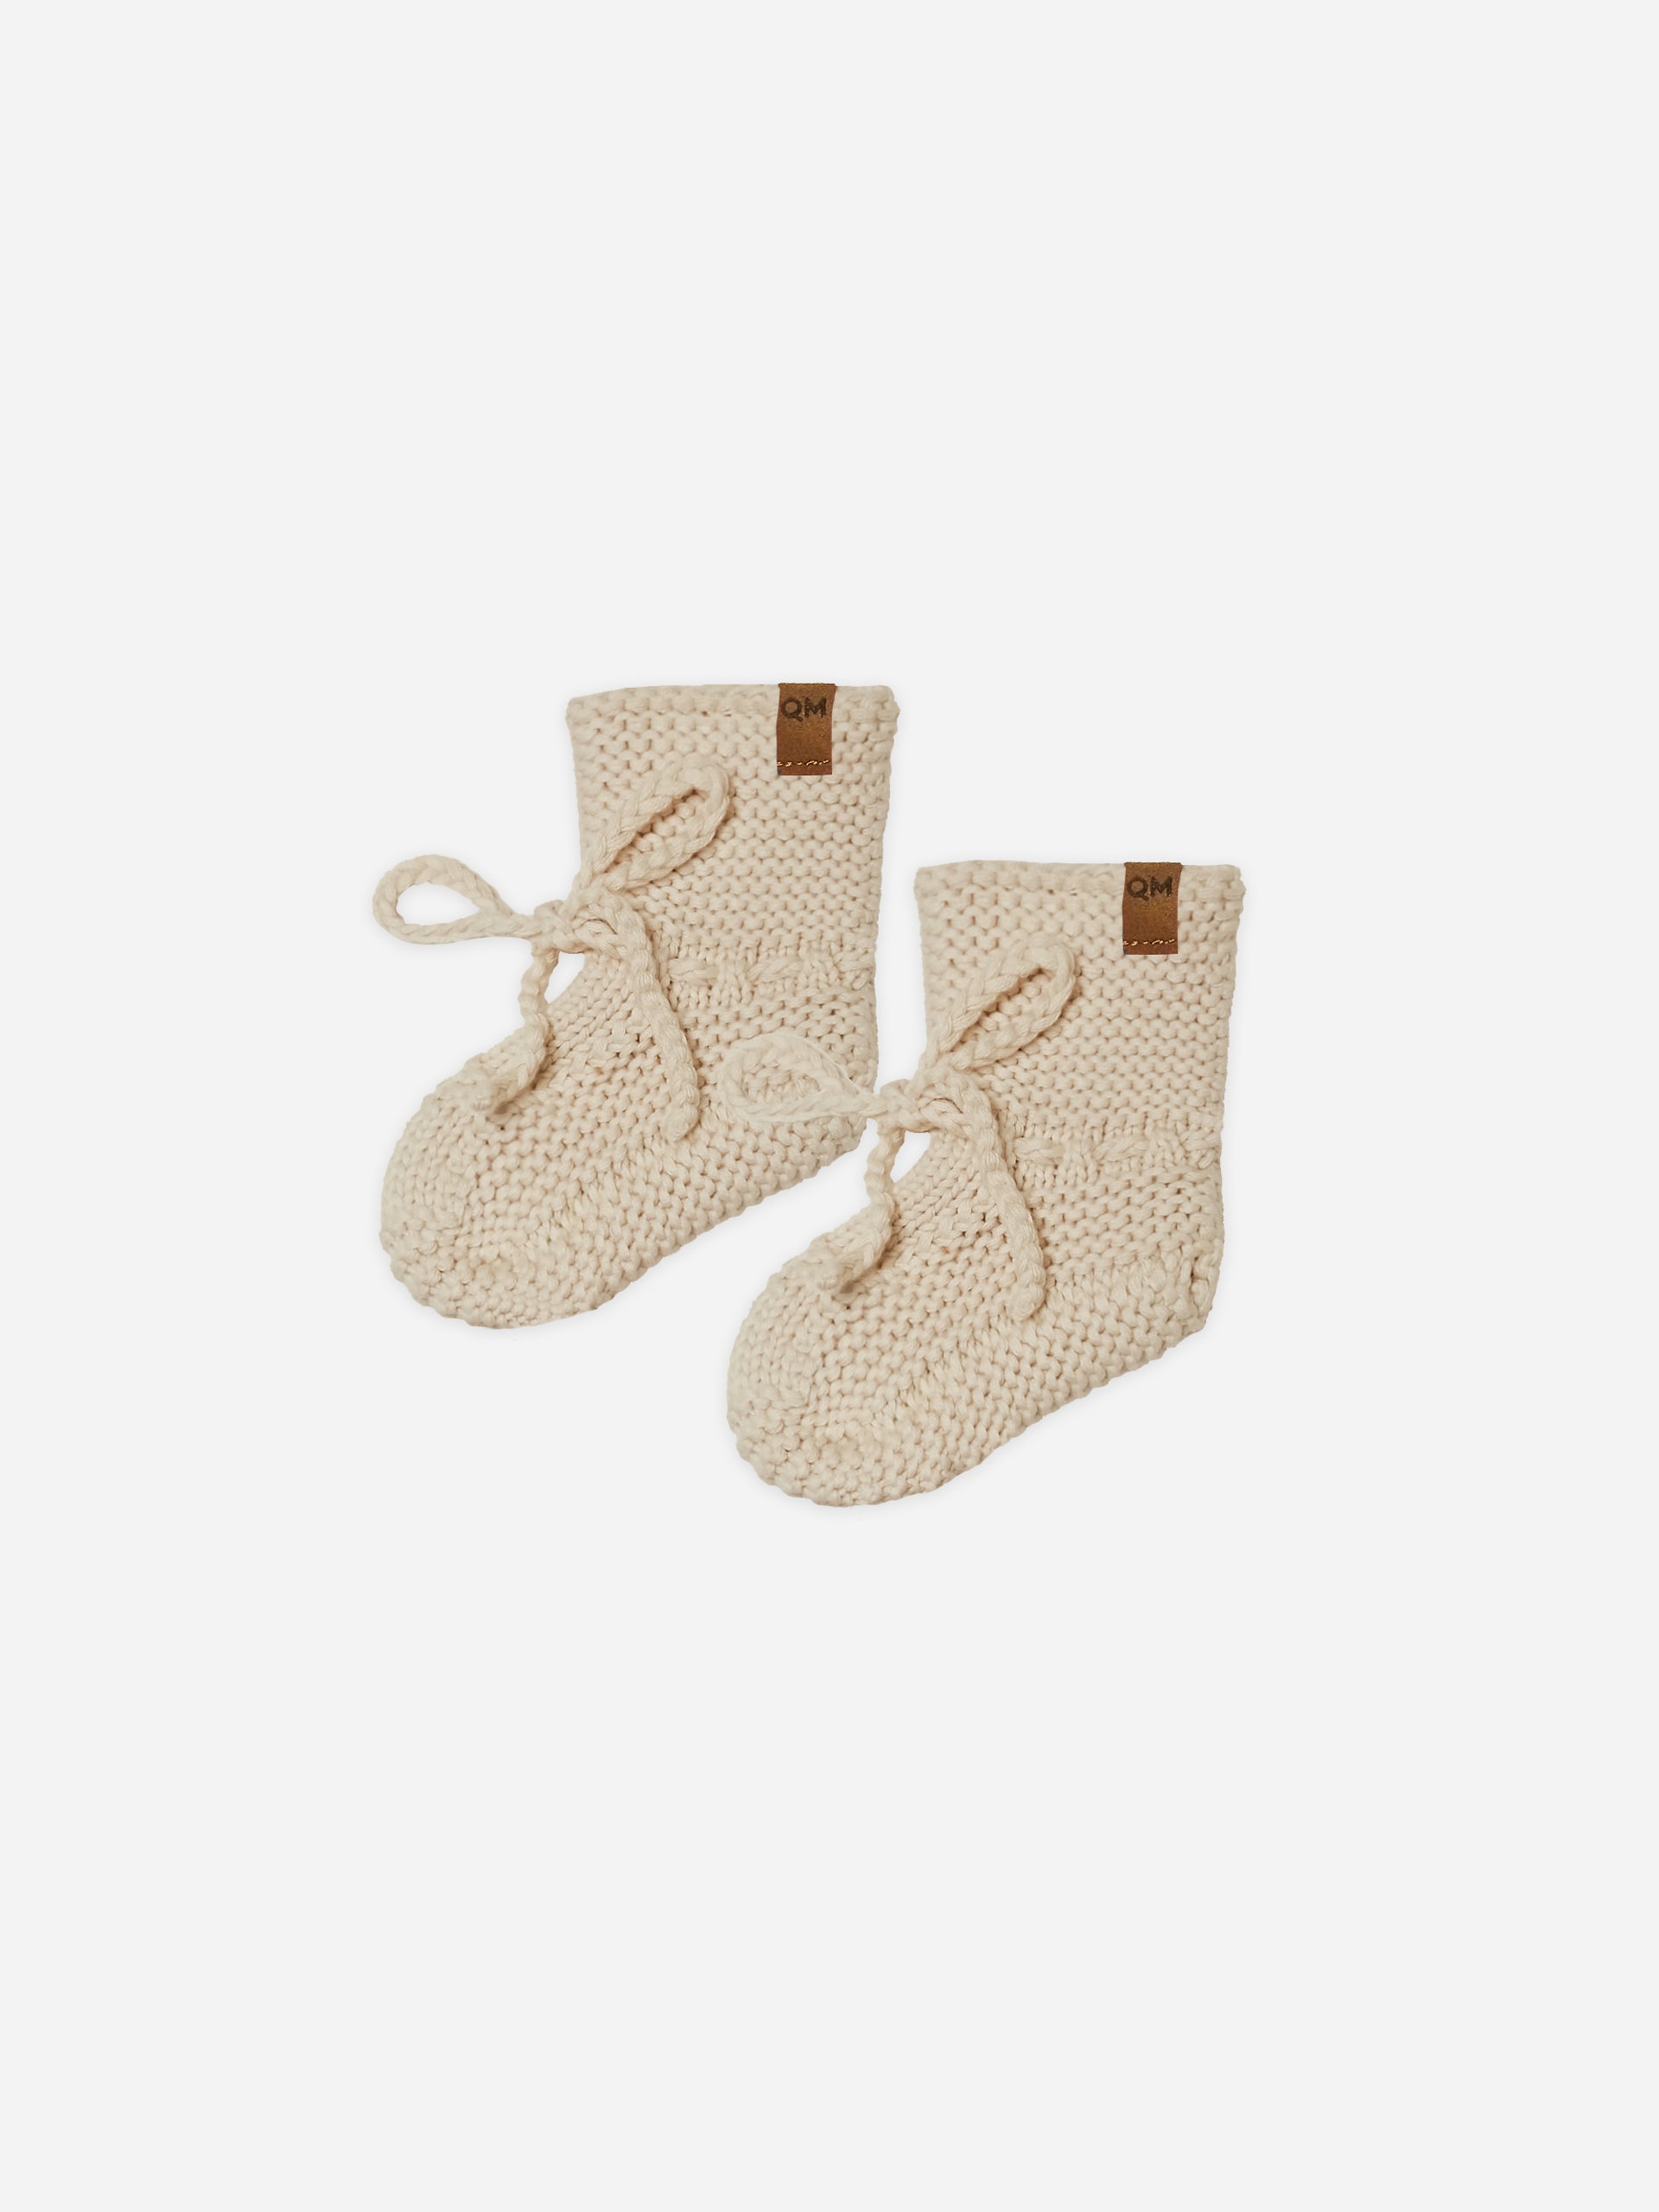 Knit Booties || Sand - Rylee + Cru | Kids Clothes | Trendy Baby Clothes | Modern Infant Outfits |